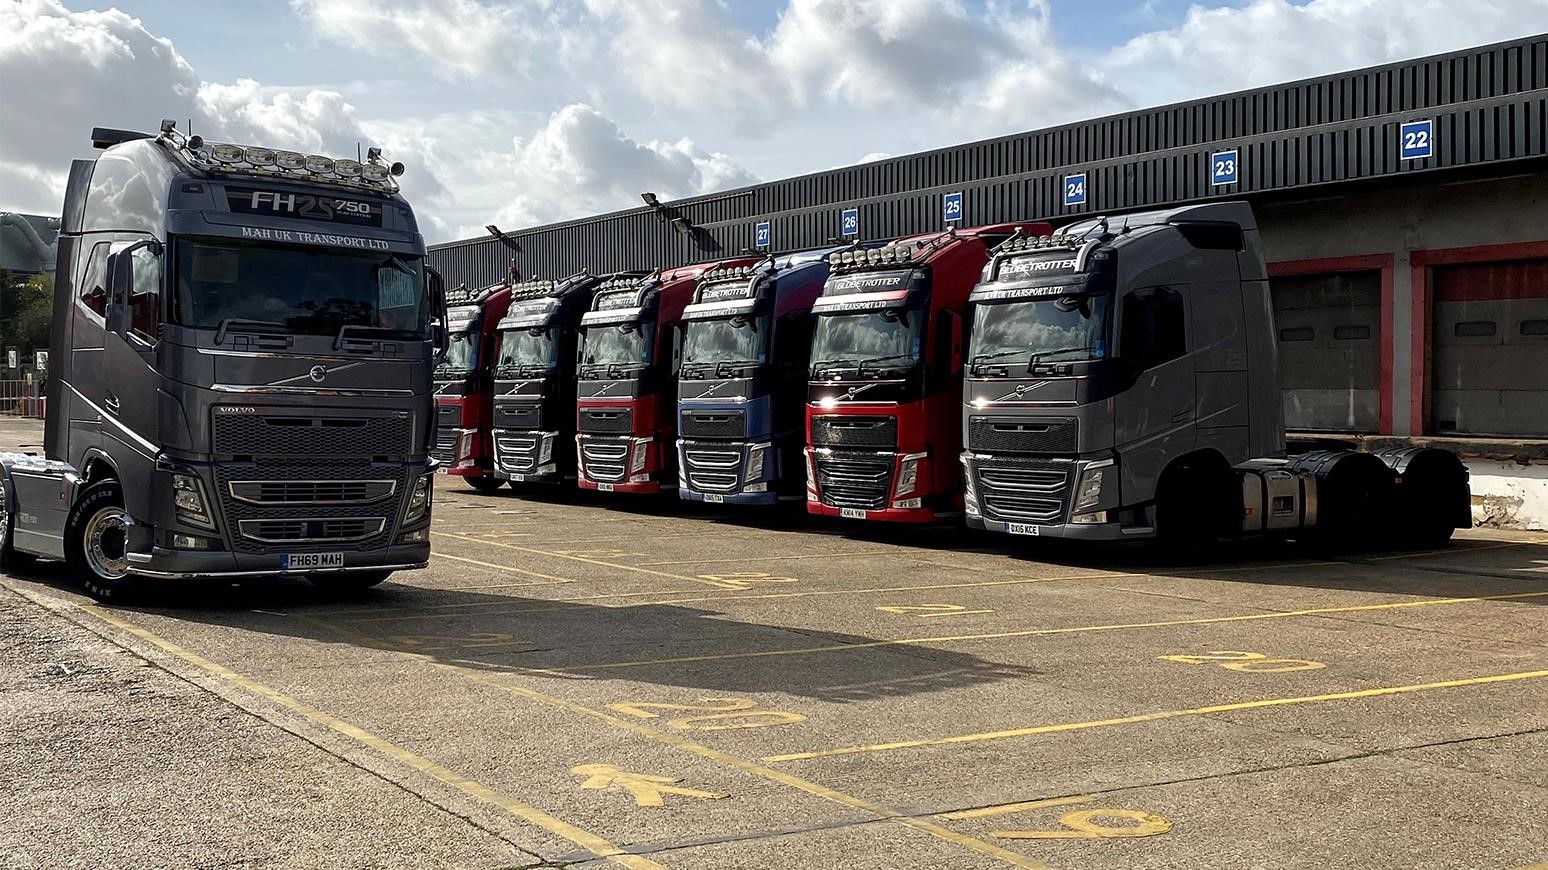 Croydon-Based Transporter Adds Five Used FH 500 Tractor Units To Its All-Volvo Fleet